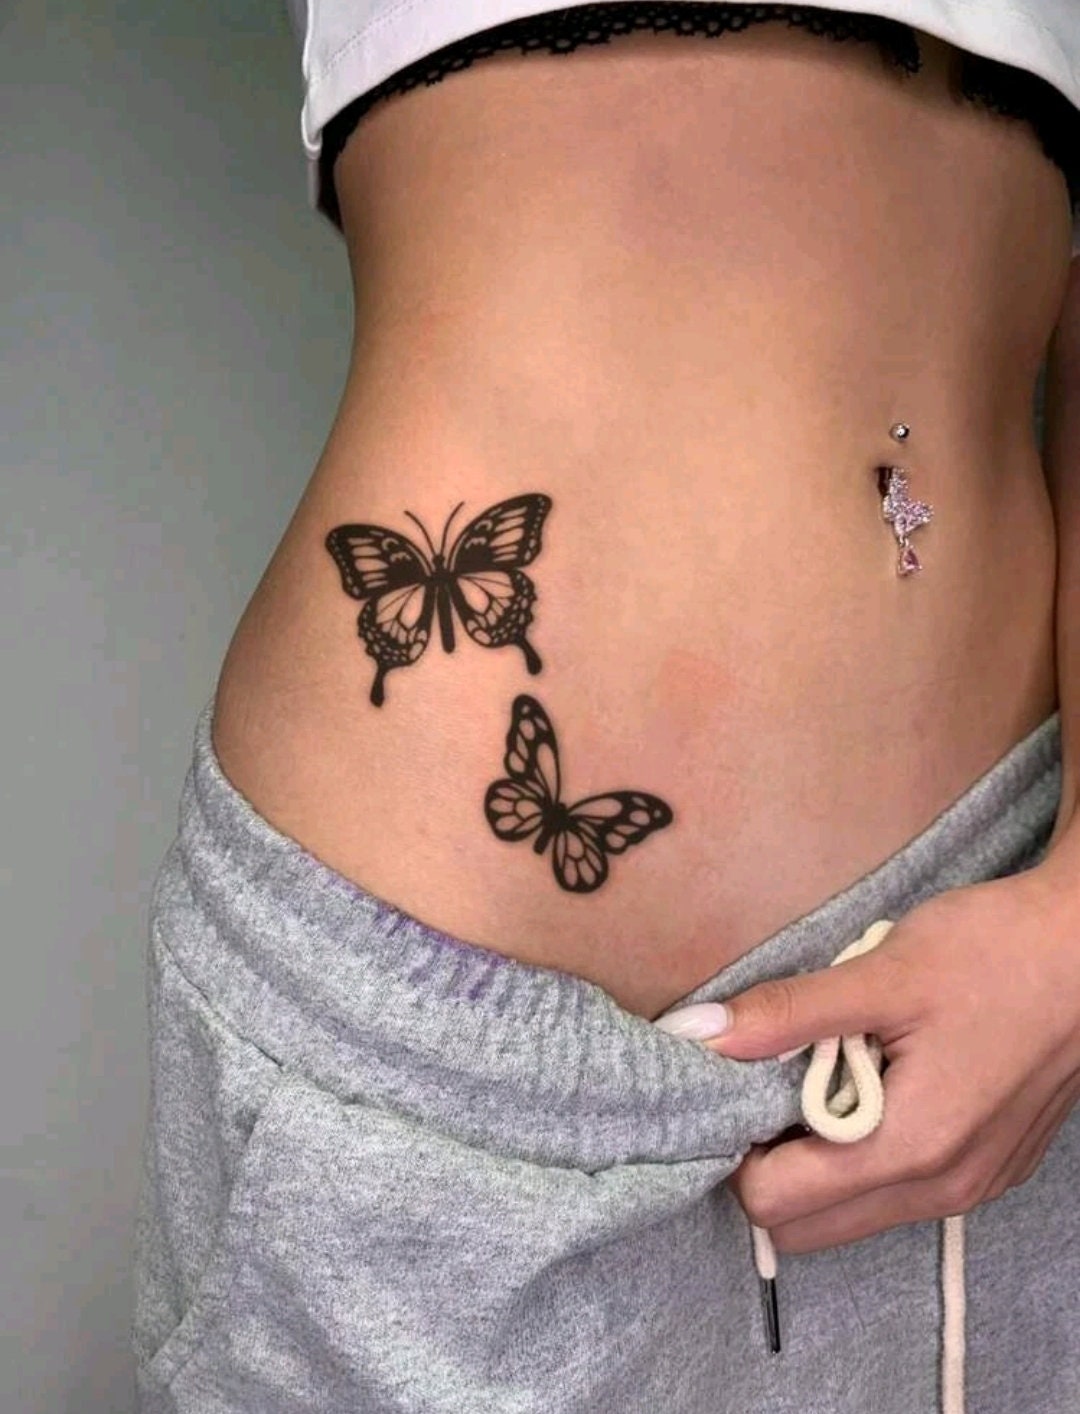 butterfly tattoos on stomach  Butterfly Tattoos Stomach 3  Beautiful  tattoos Butterfly tattoo on shoulder Small tattoos